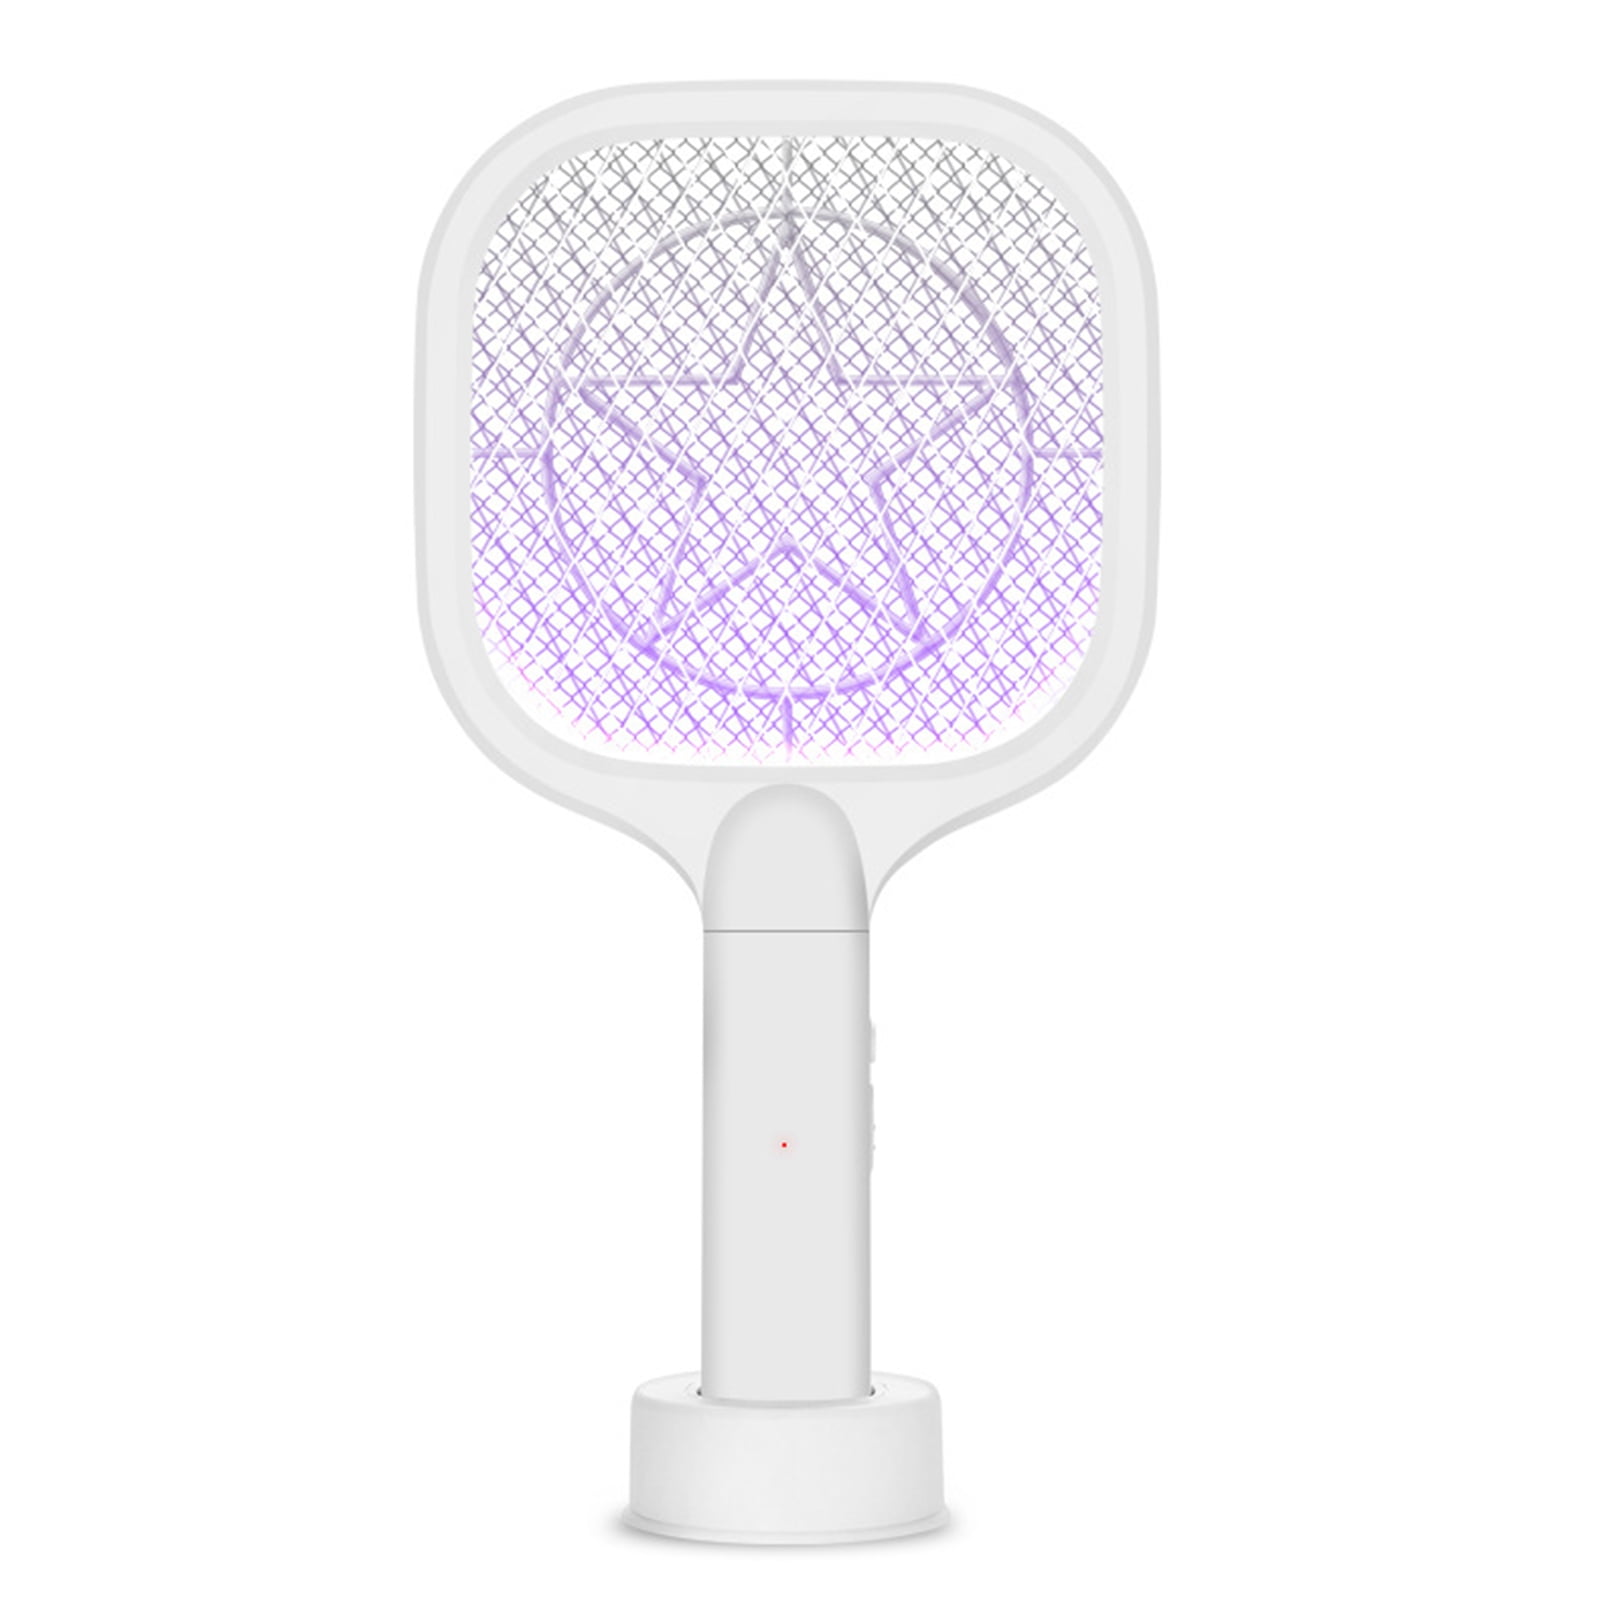 Details about   2 In 1 Electric USB Rechargable Racket Fly Swatter Mosquito Insect Killer Zapper 